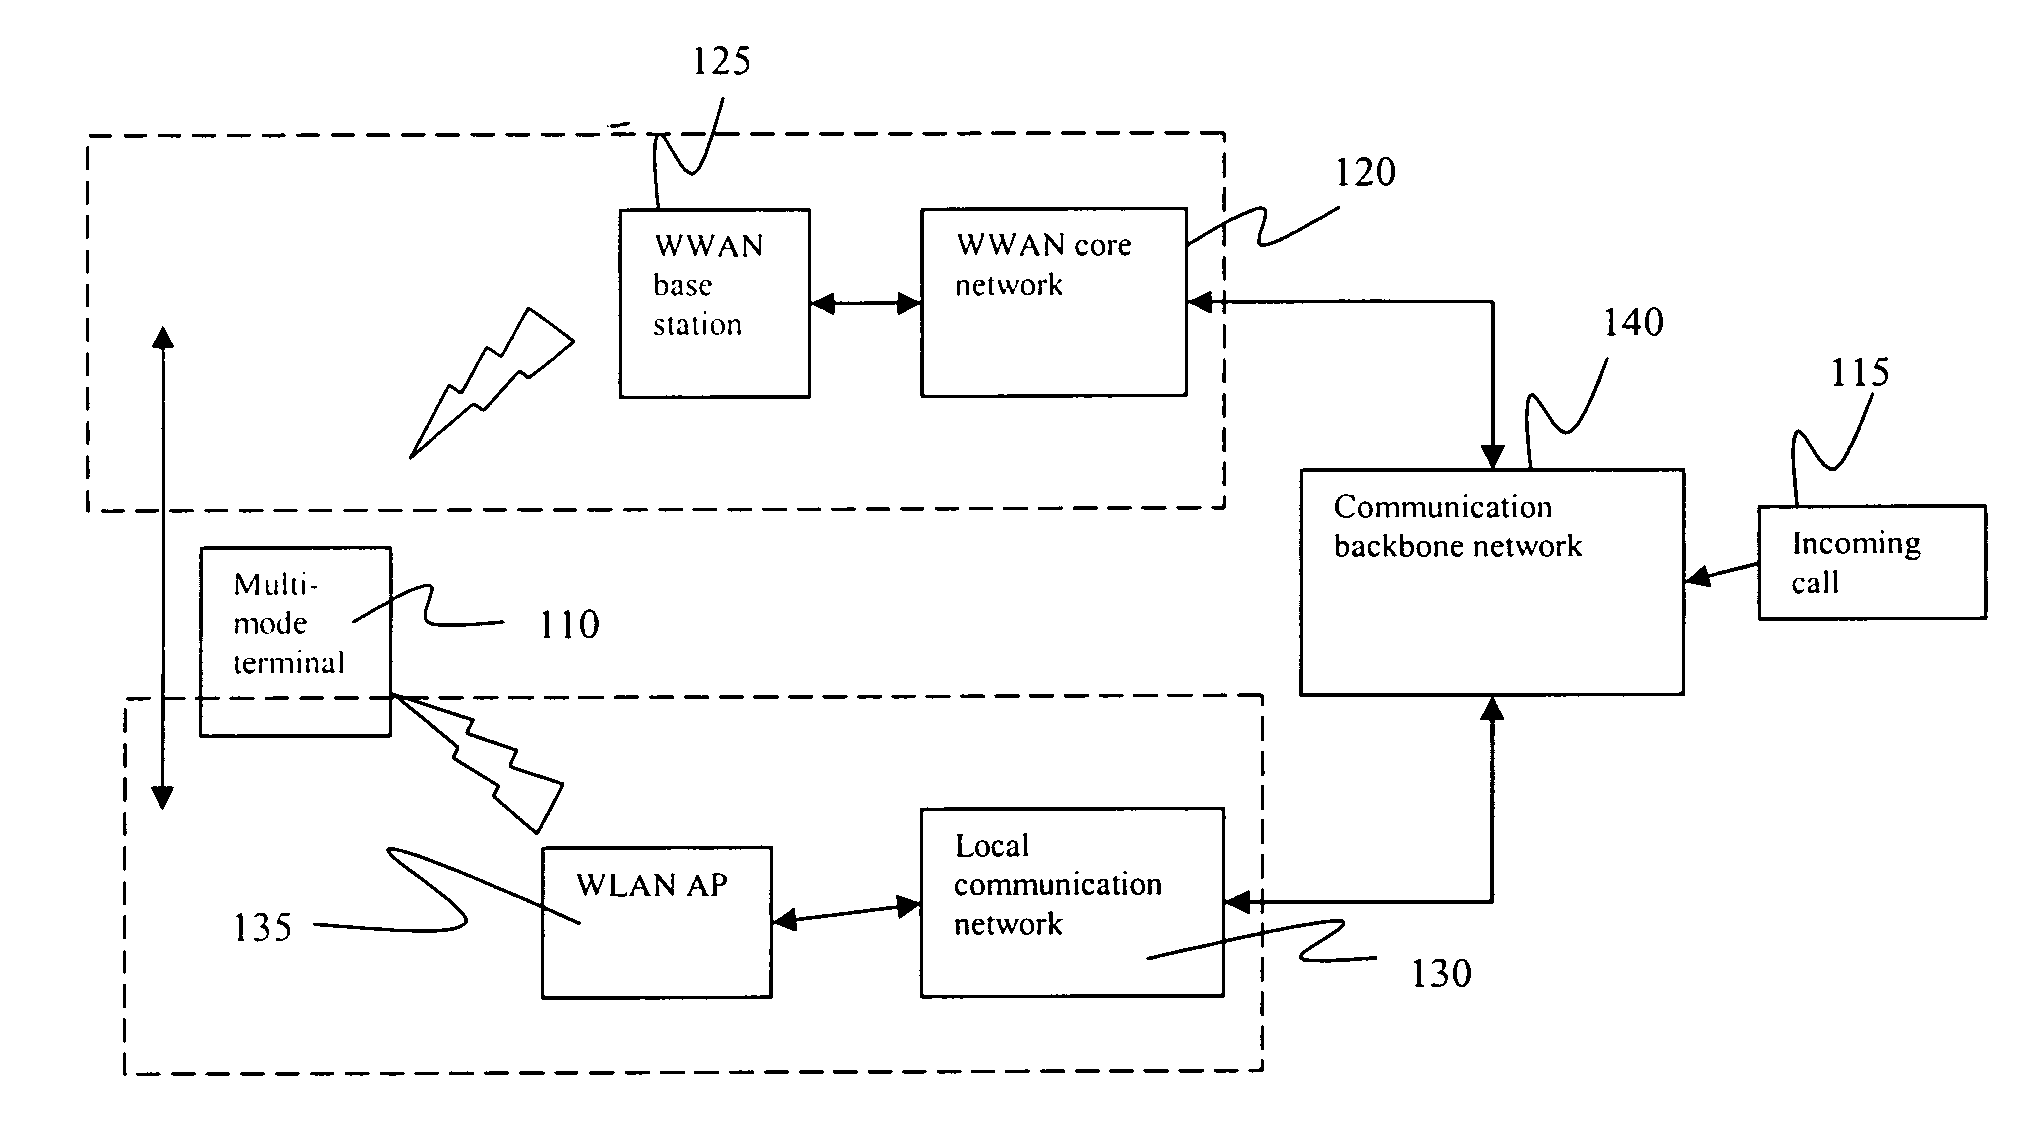 Method and system for seamless service availability for multi-mode terminals in different access networks